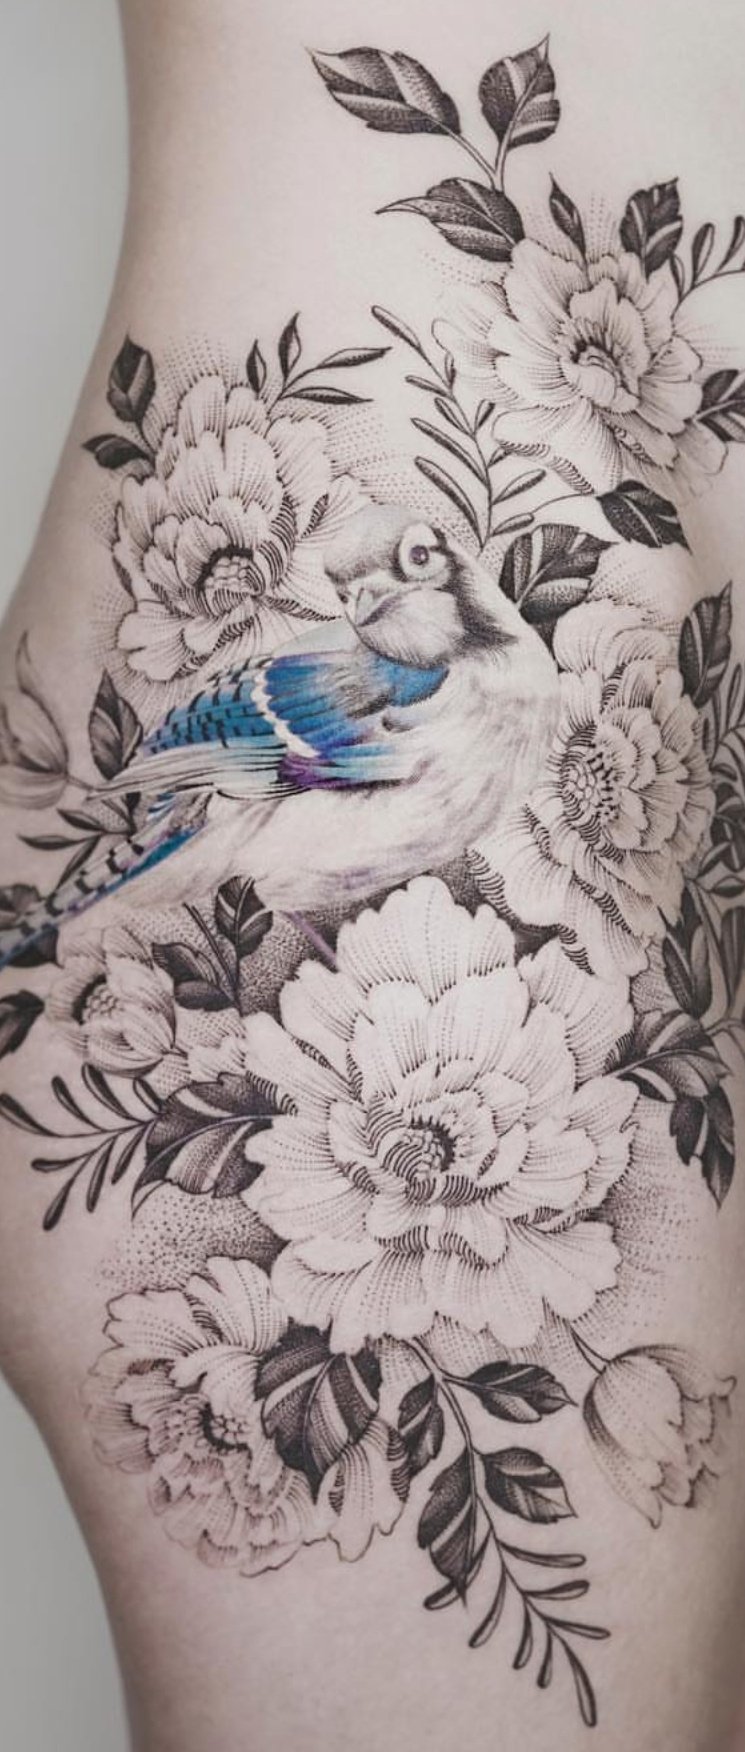 Tattooist Inks Delicate Floral Tattoos That Bloom Forever Across Skin |  Tattoos, Floral tattoo, Tattoo artists